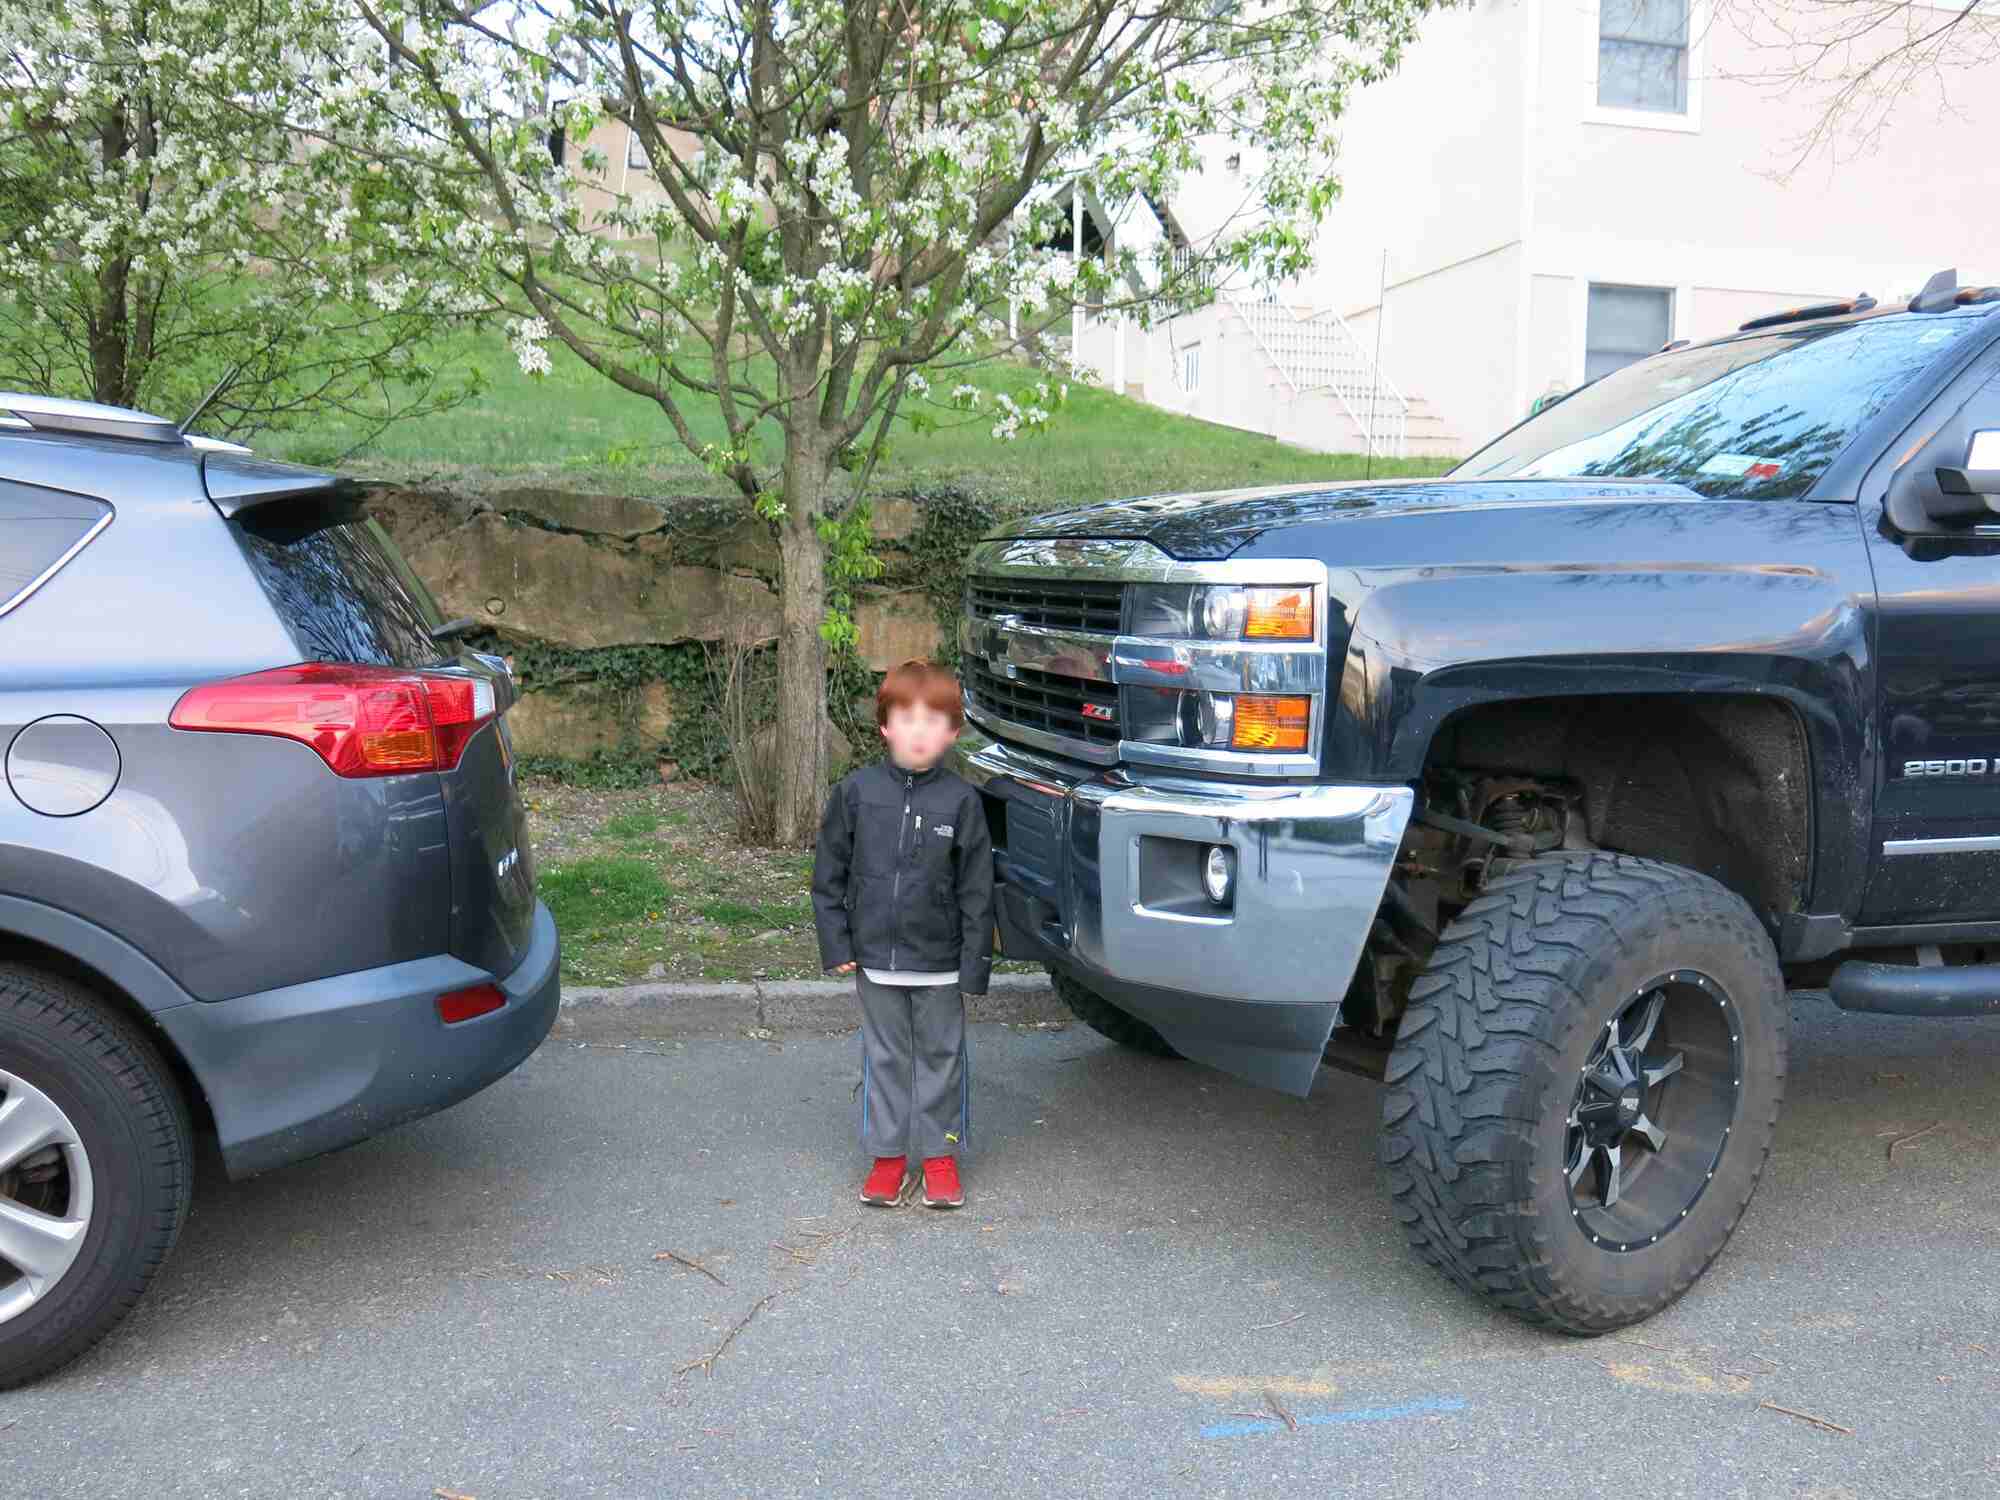 A kid standing in front (and dwarfed by) of a Chevy Silverado 2500 pickup truck with lift kit.